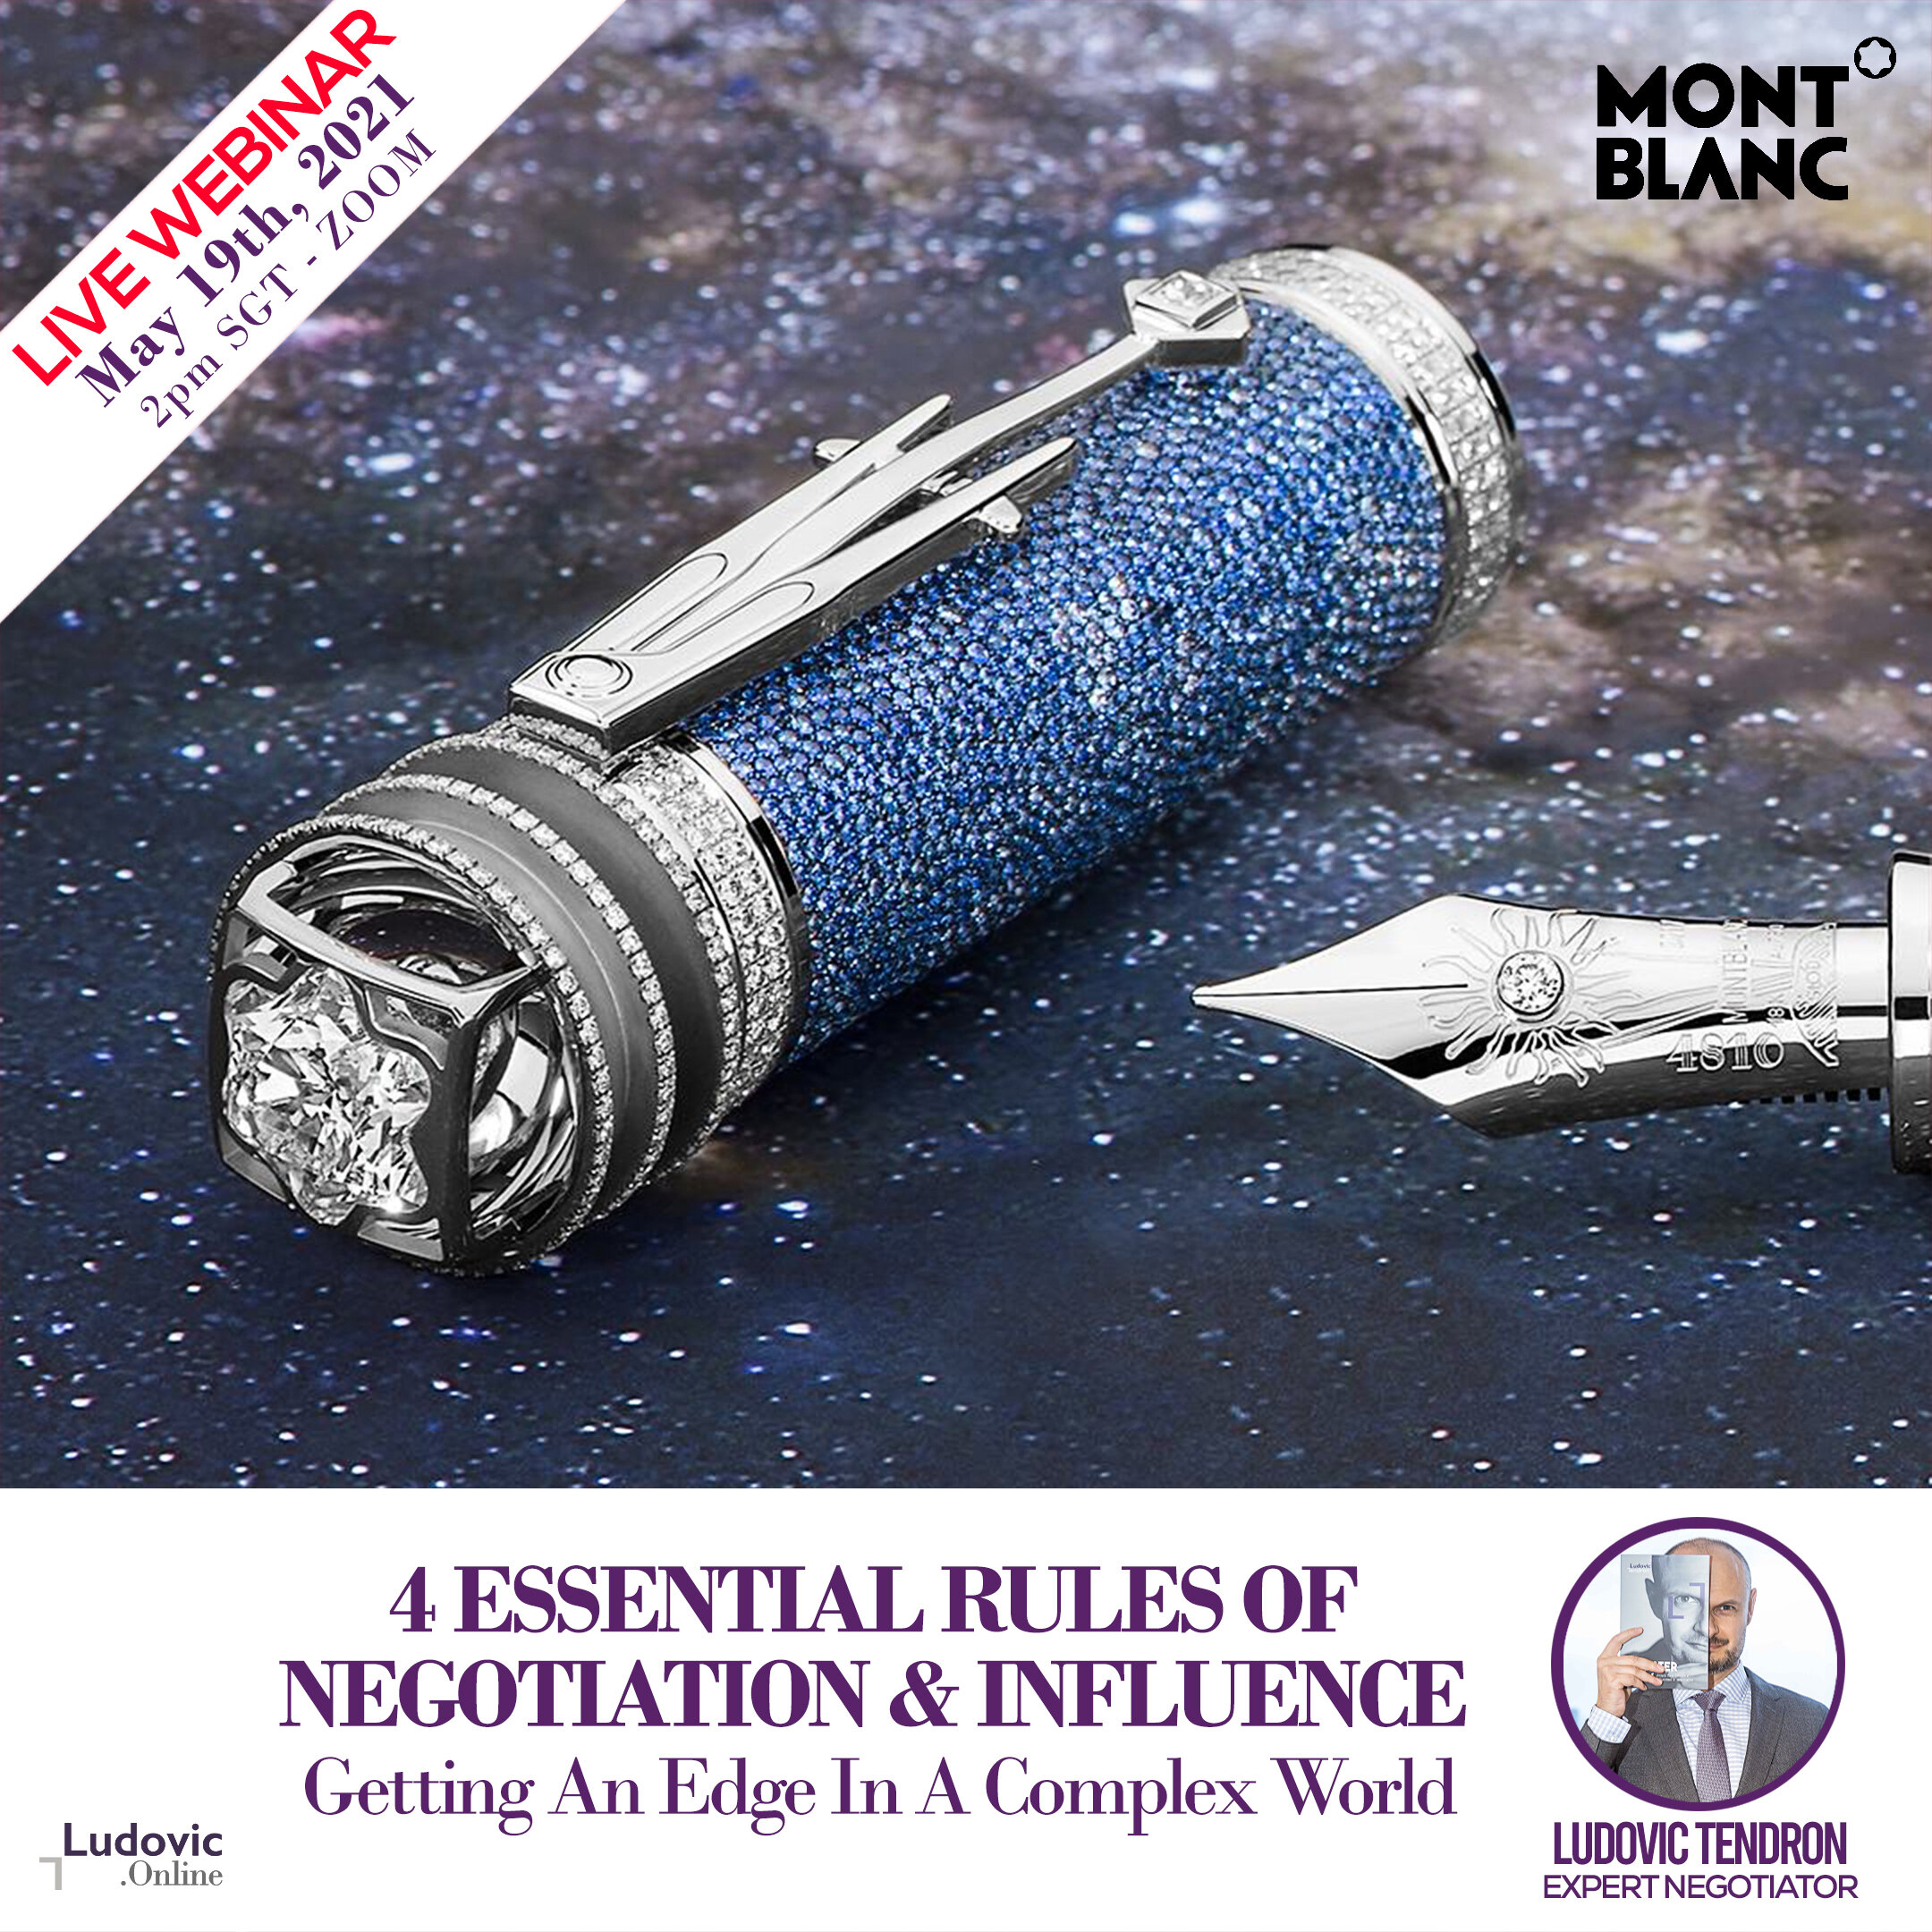 Training on Negotiation &amp; Influence for Montblanc